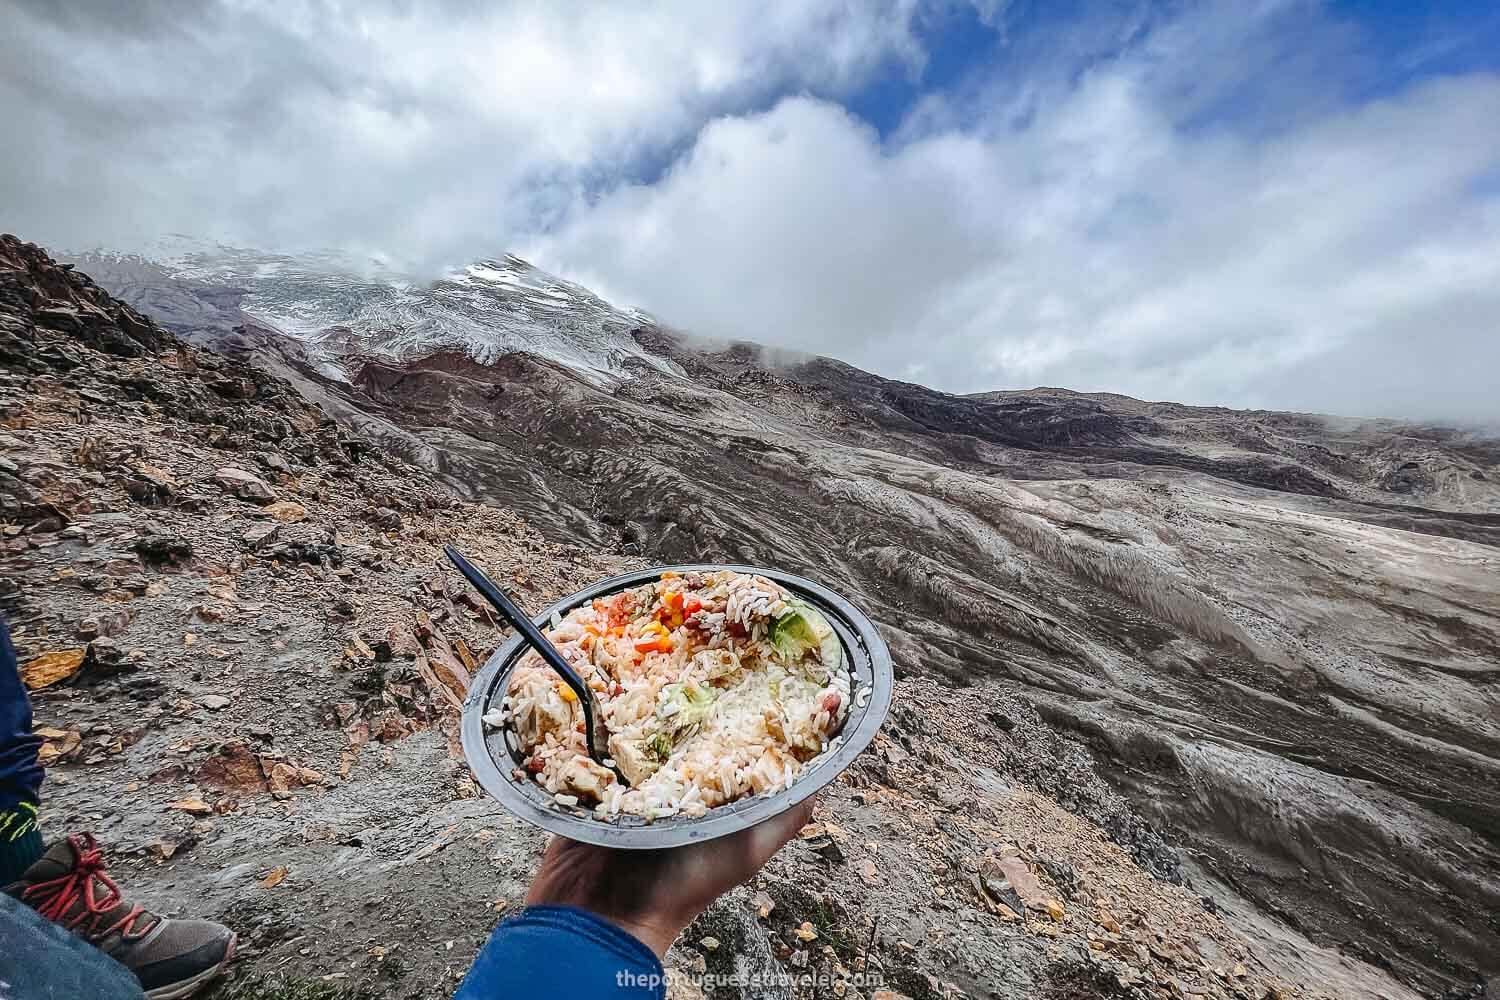 Having lunch with a glacier view